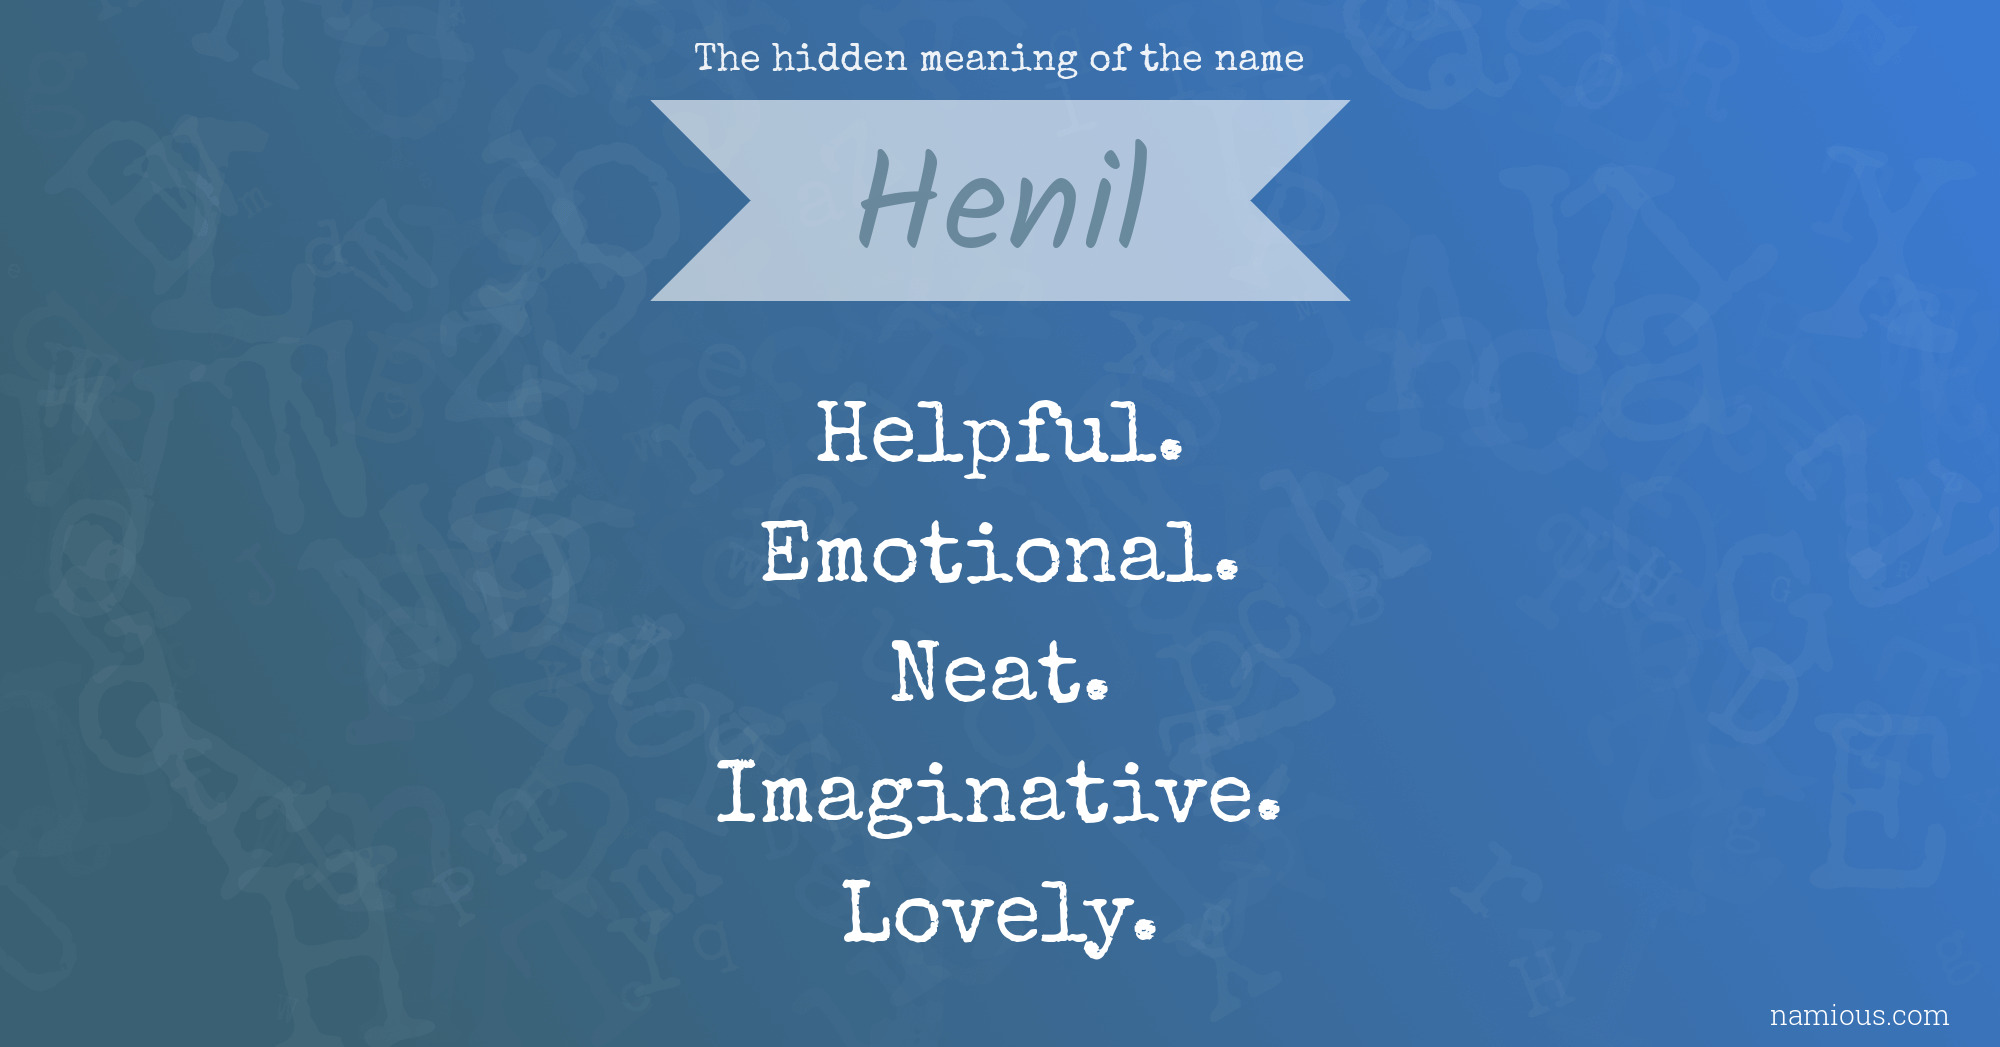 The hidden meaning of the name Henil